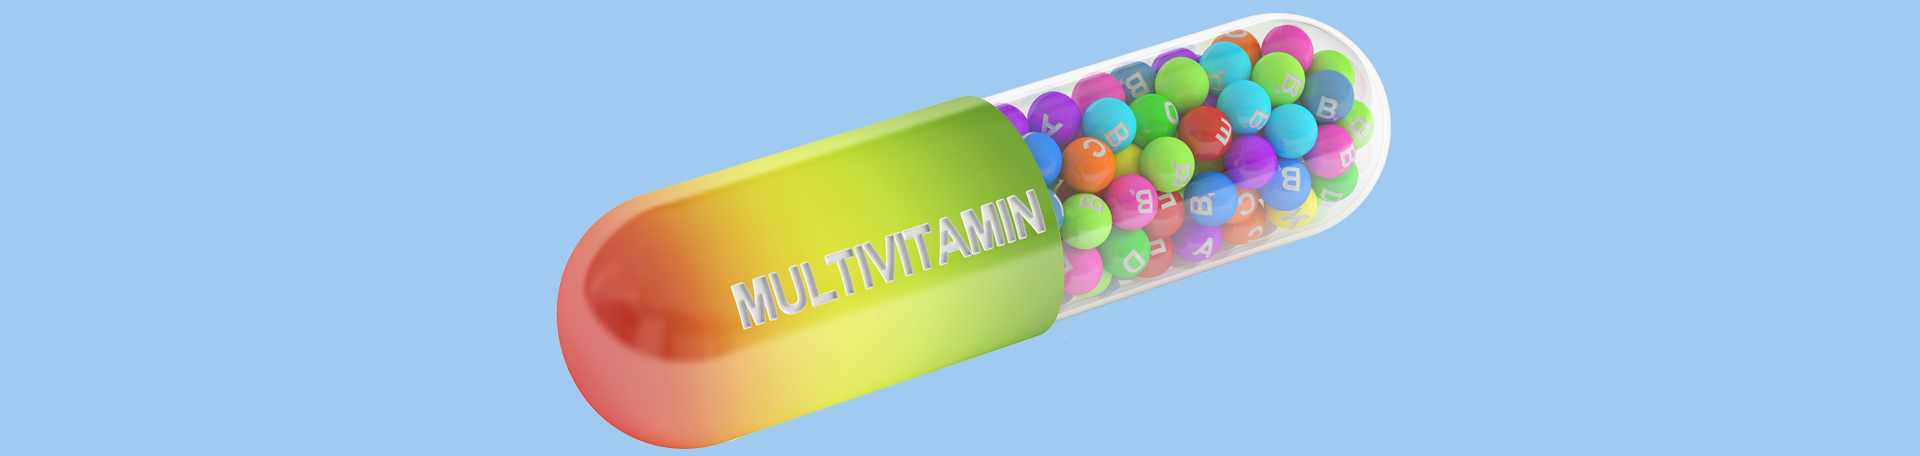 Nashua multivitamin picture to demonstrate benefits for memory and cognition